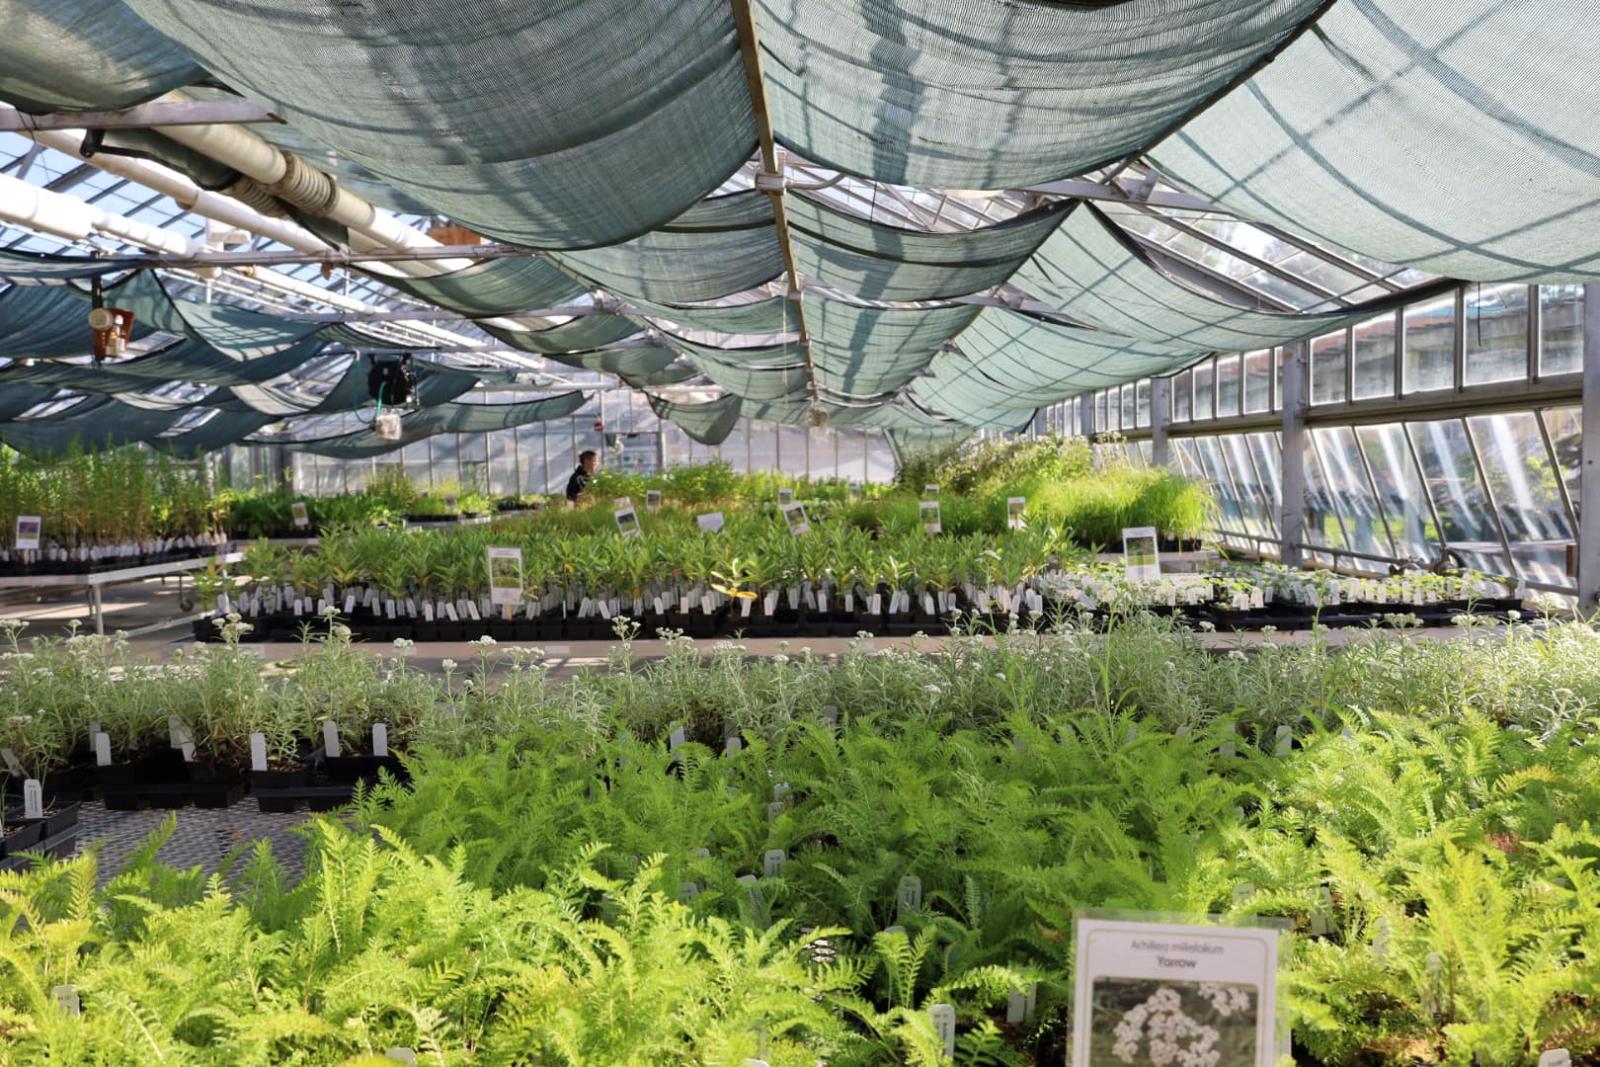 Native plant sale, rows of plants in a greenhouse